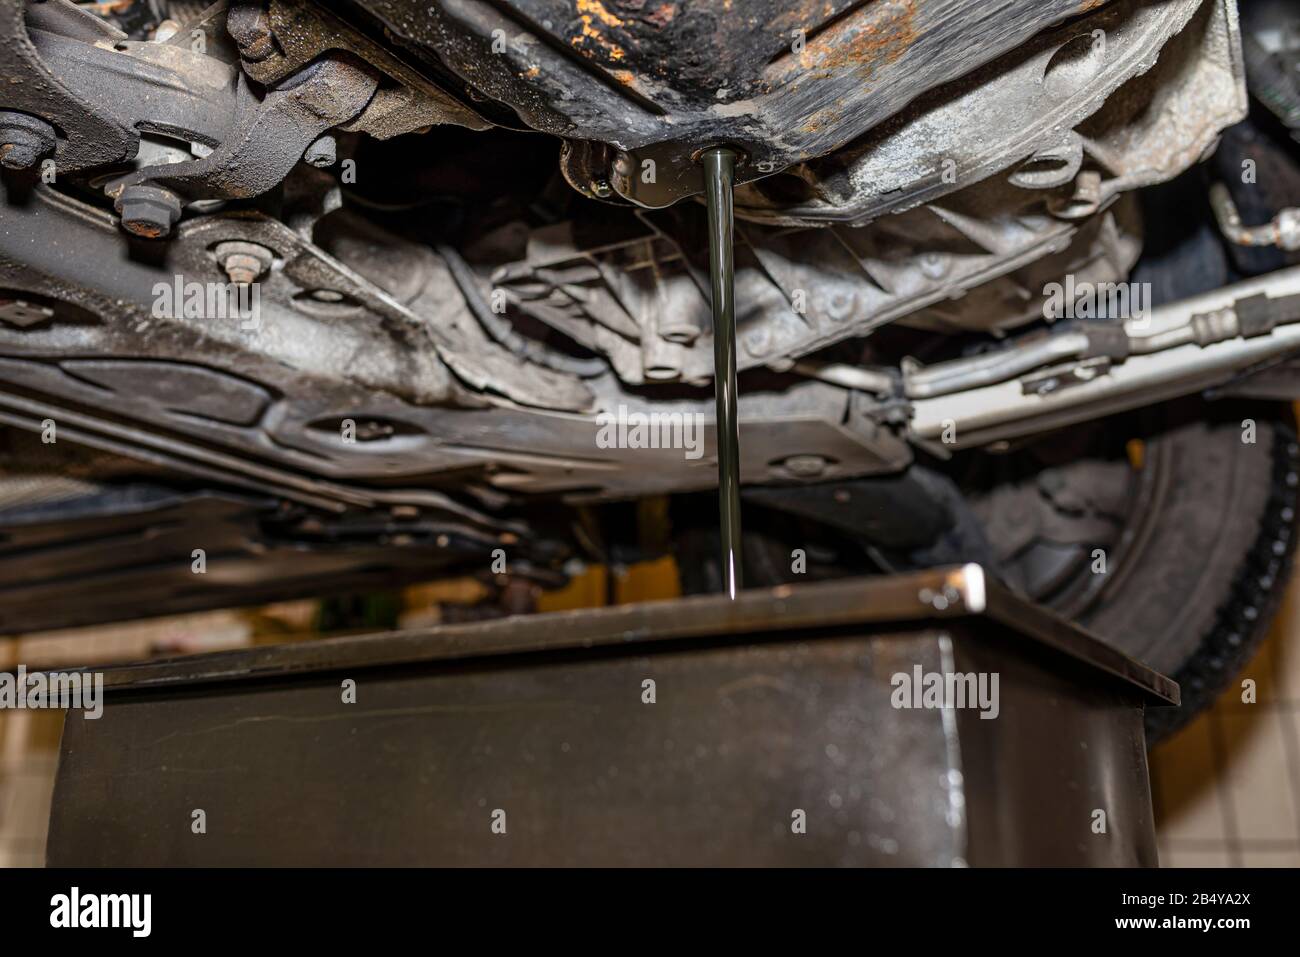 Draining used diesel engine oil from an oil pan into a metal container in a car workshop. Stock Photo